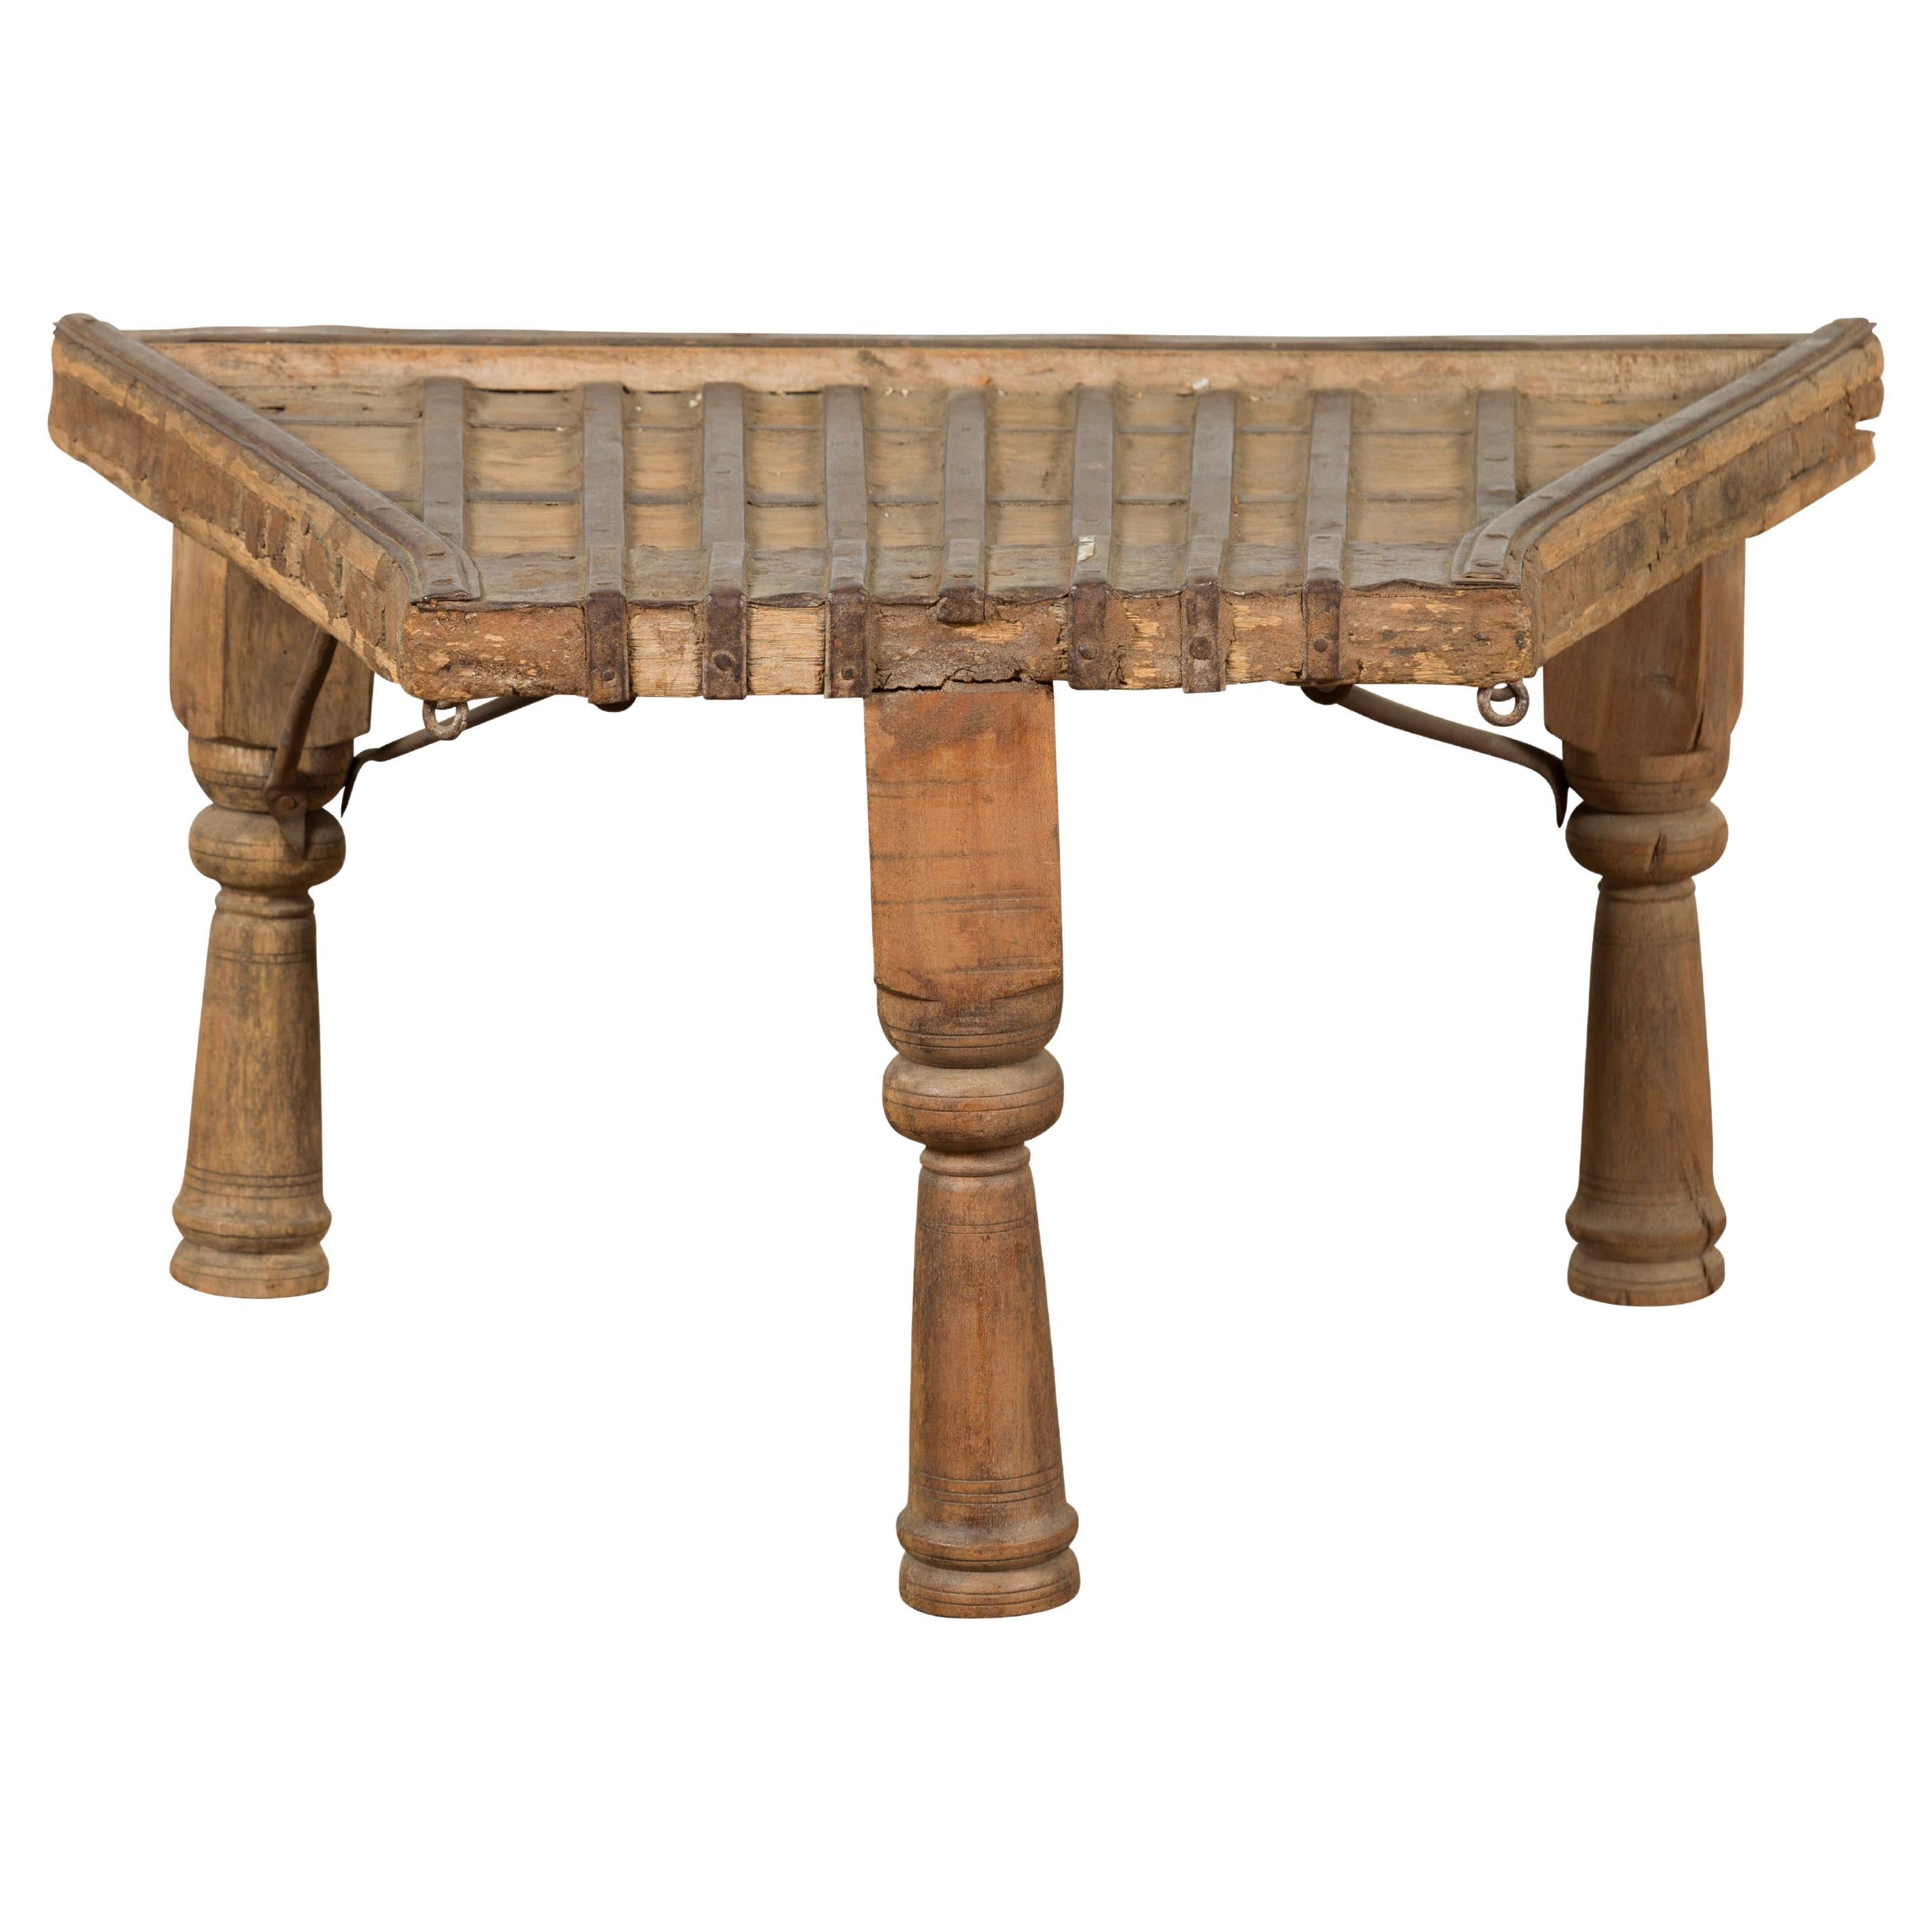 Indian 19th Century Wood Bullock Cart Made into a Coffee Table with Iron Details